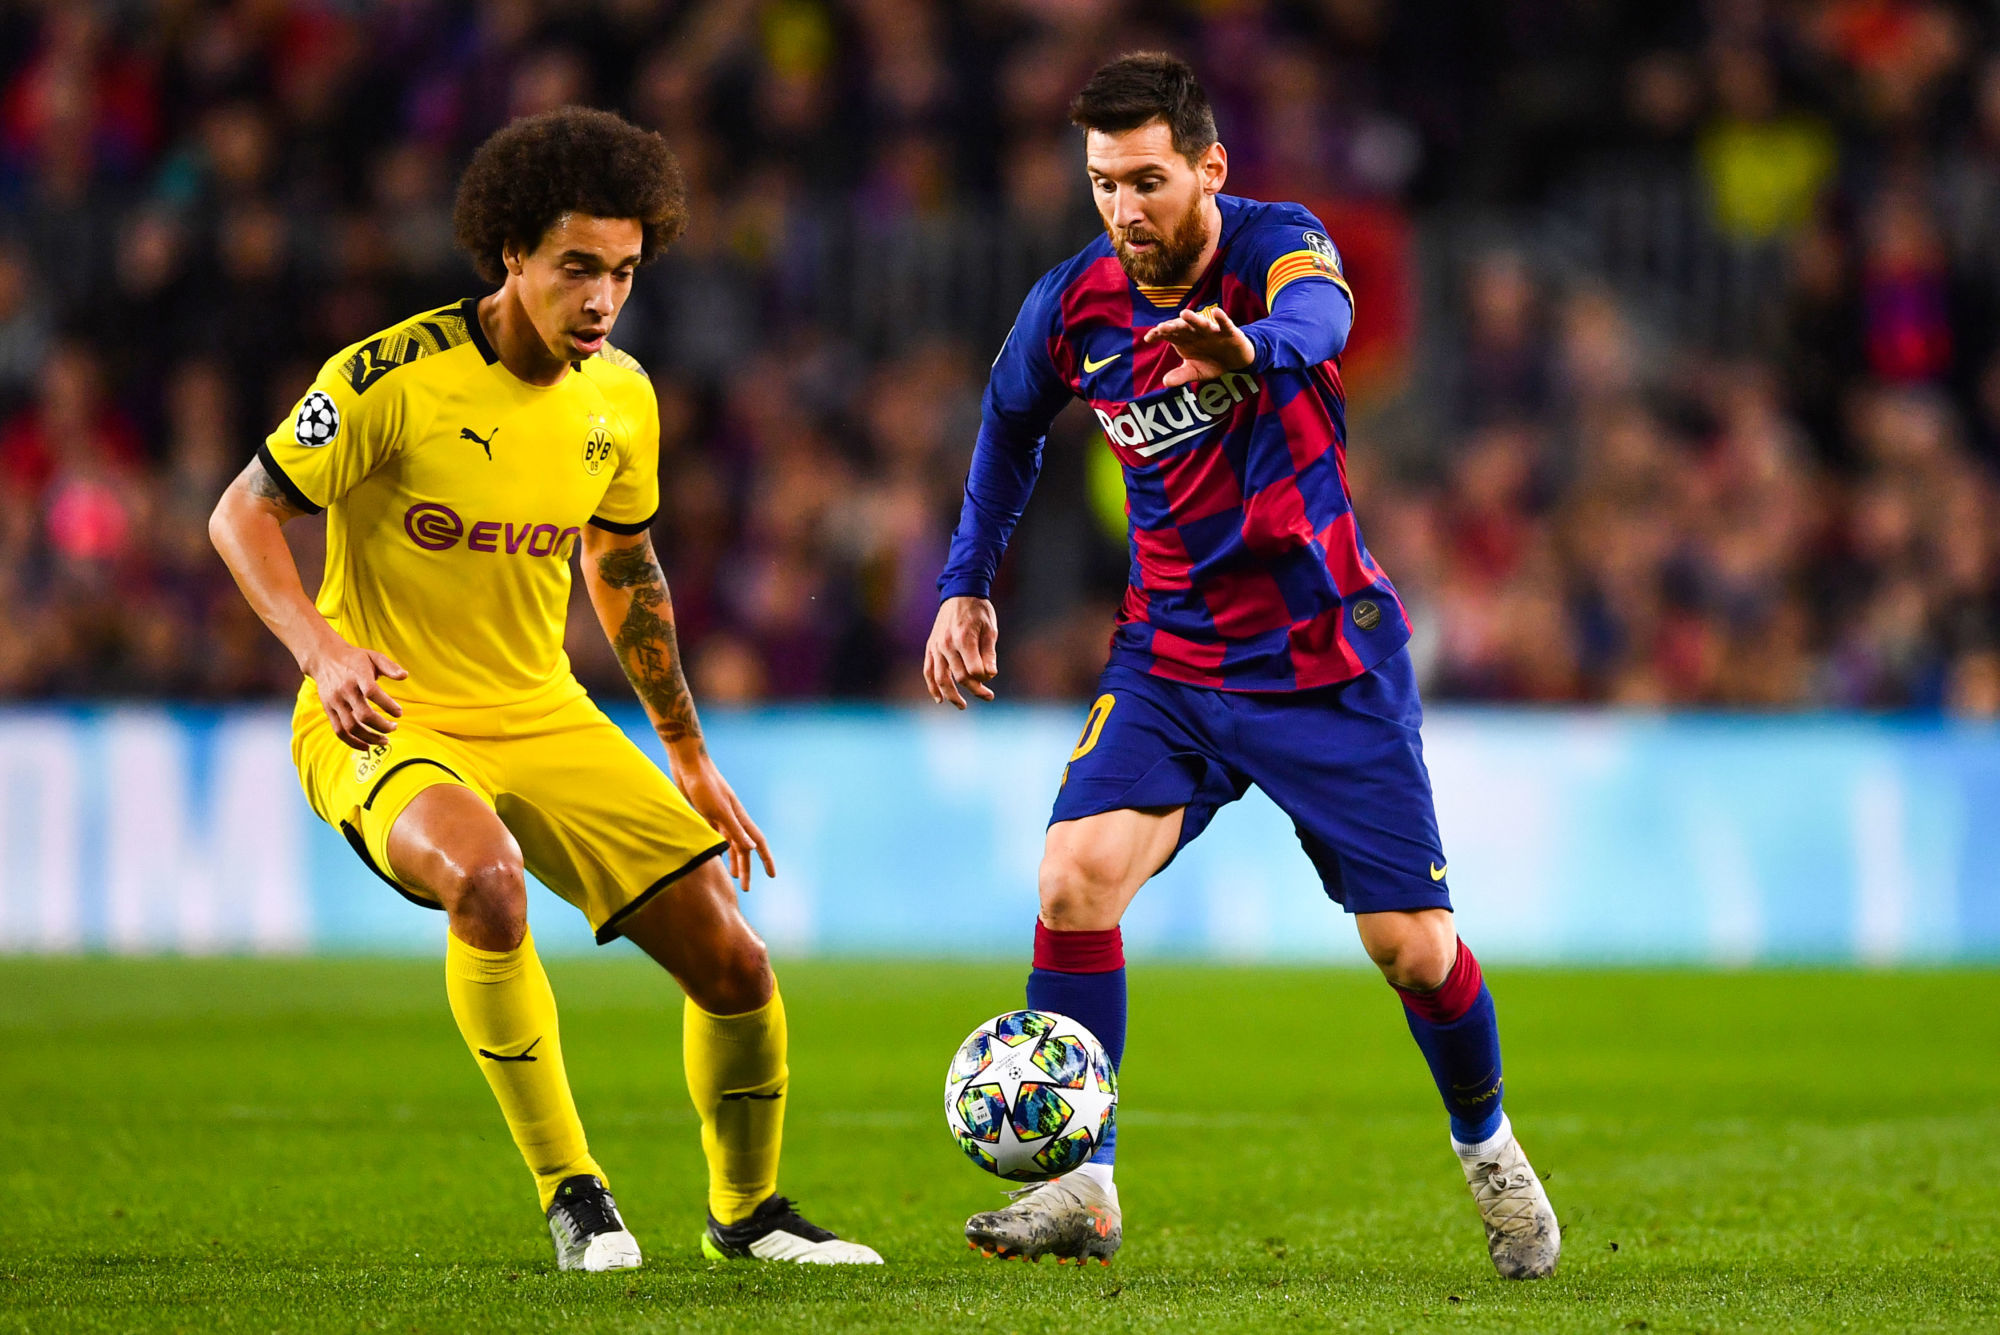 27 November 2019, Spain, Barcelona: Soccer: Champions League, Group stage, Group F, 5th matchday, FC Barcelona - Borussia Dortmund at Camp Nou. Dortmund's Axel Witsel (l) and Barcelona's Lionel Messi fight ball. Photo: Marius Becker/dpa 


Photo by Icon Sport - Camp Nou - Barcelone (Espagne)